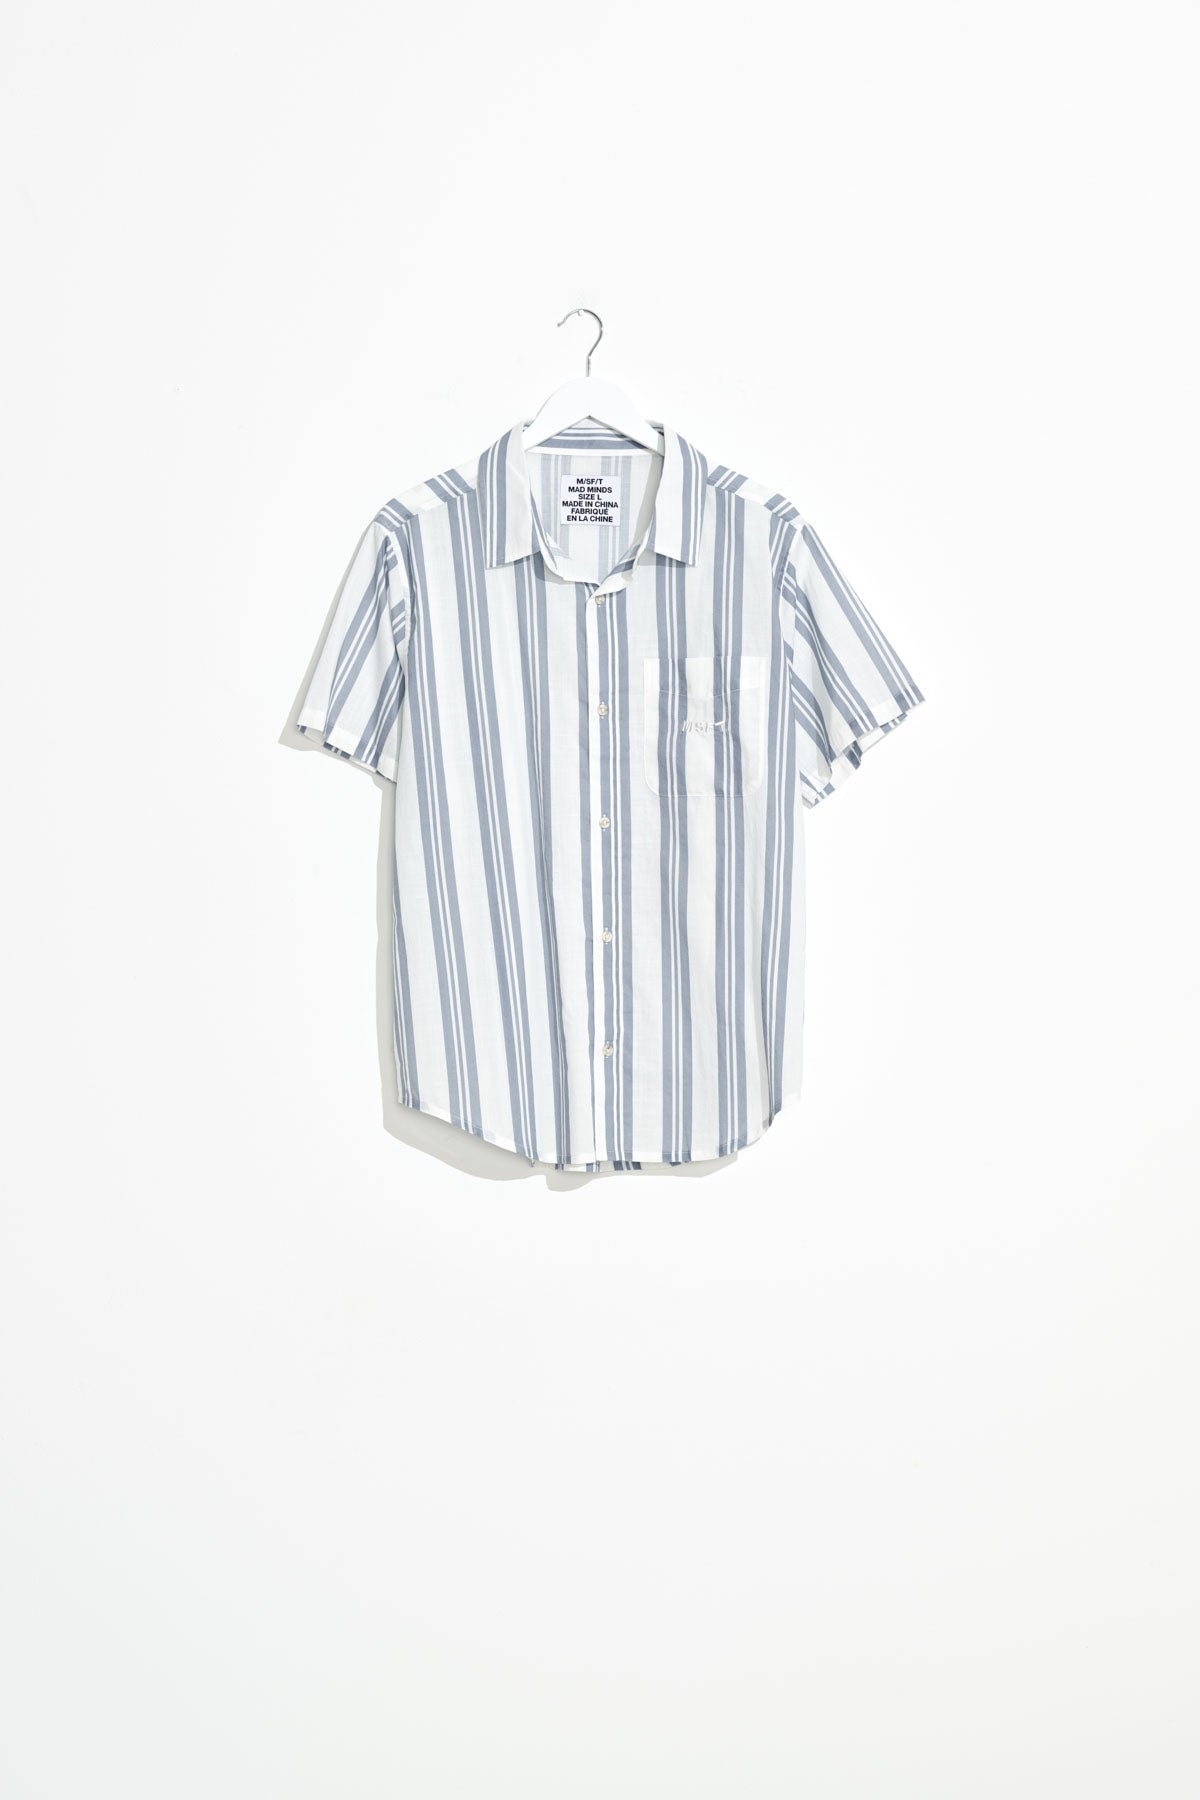 Misfit Shapes - Primary Vacation SS Shirt - Blue Stripe